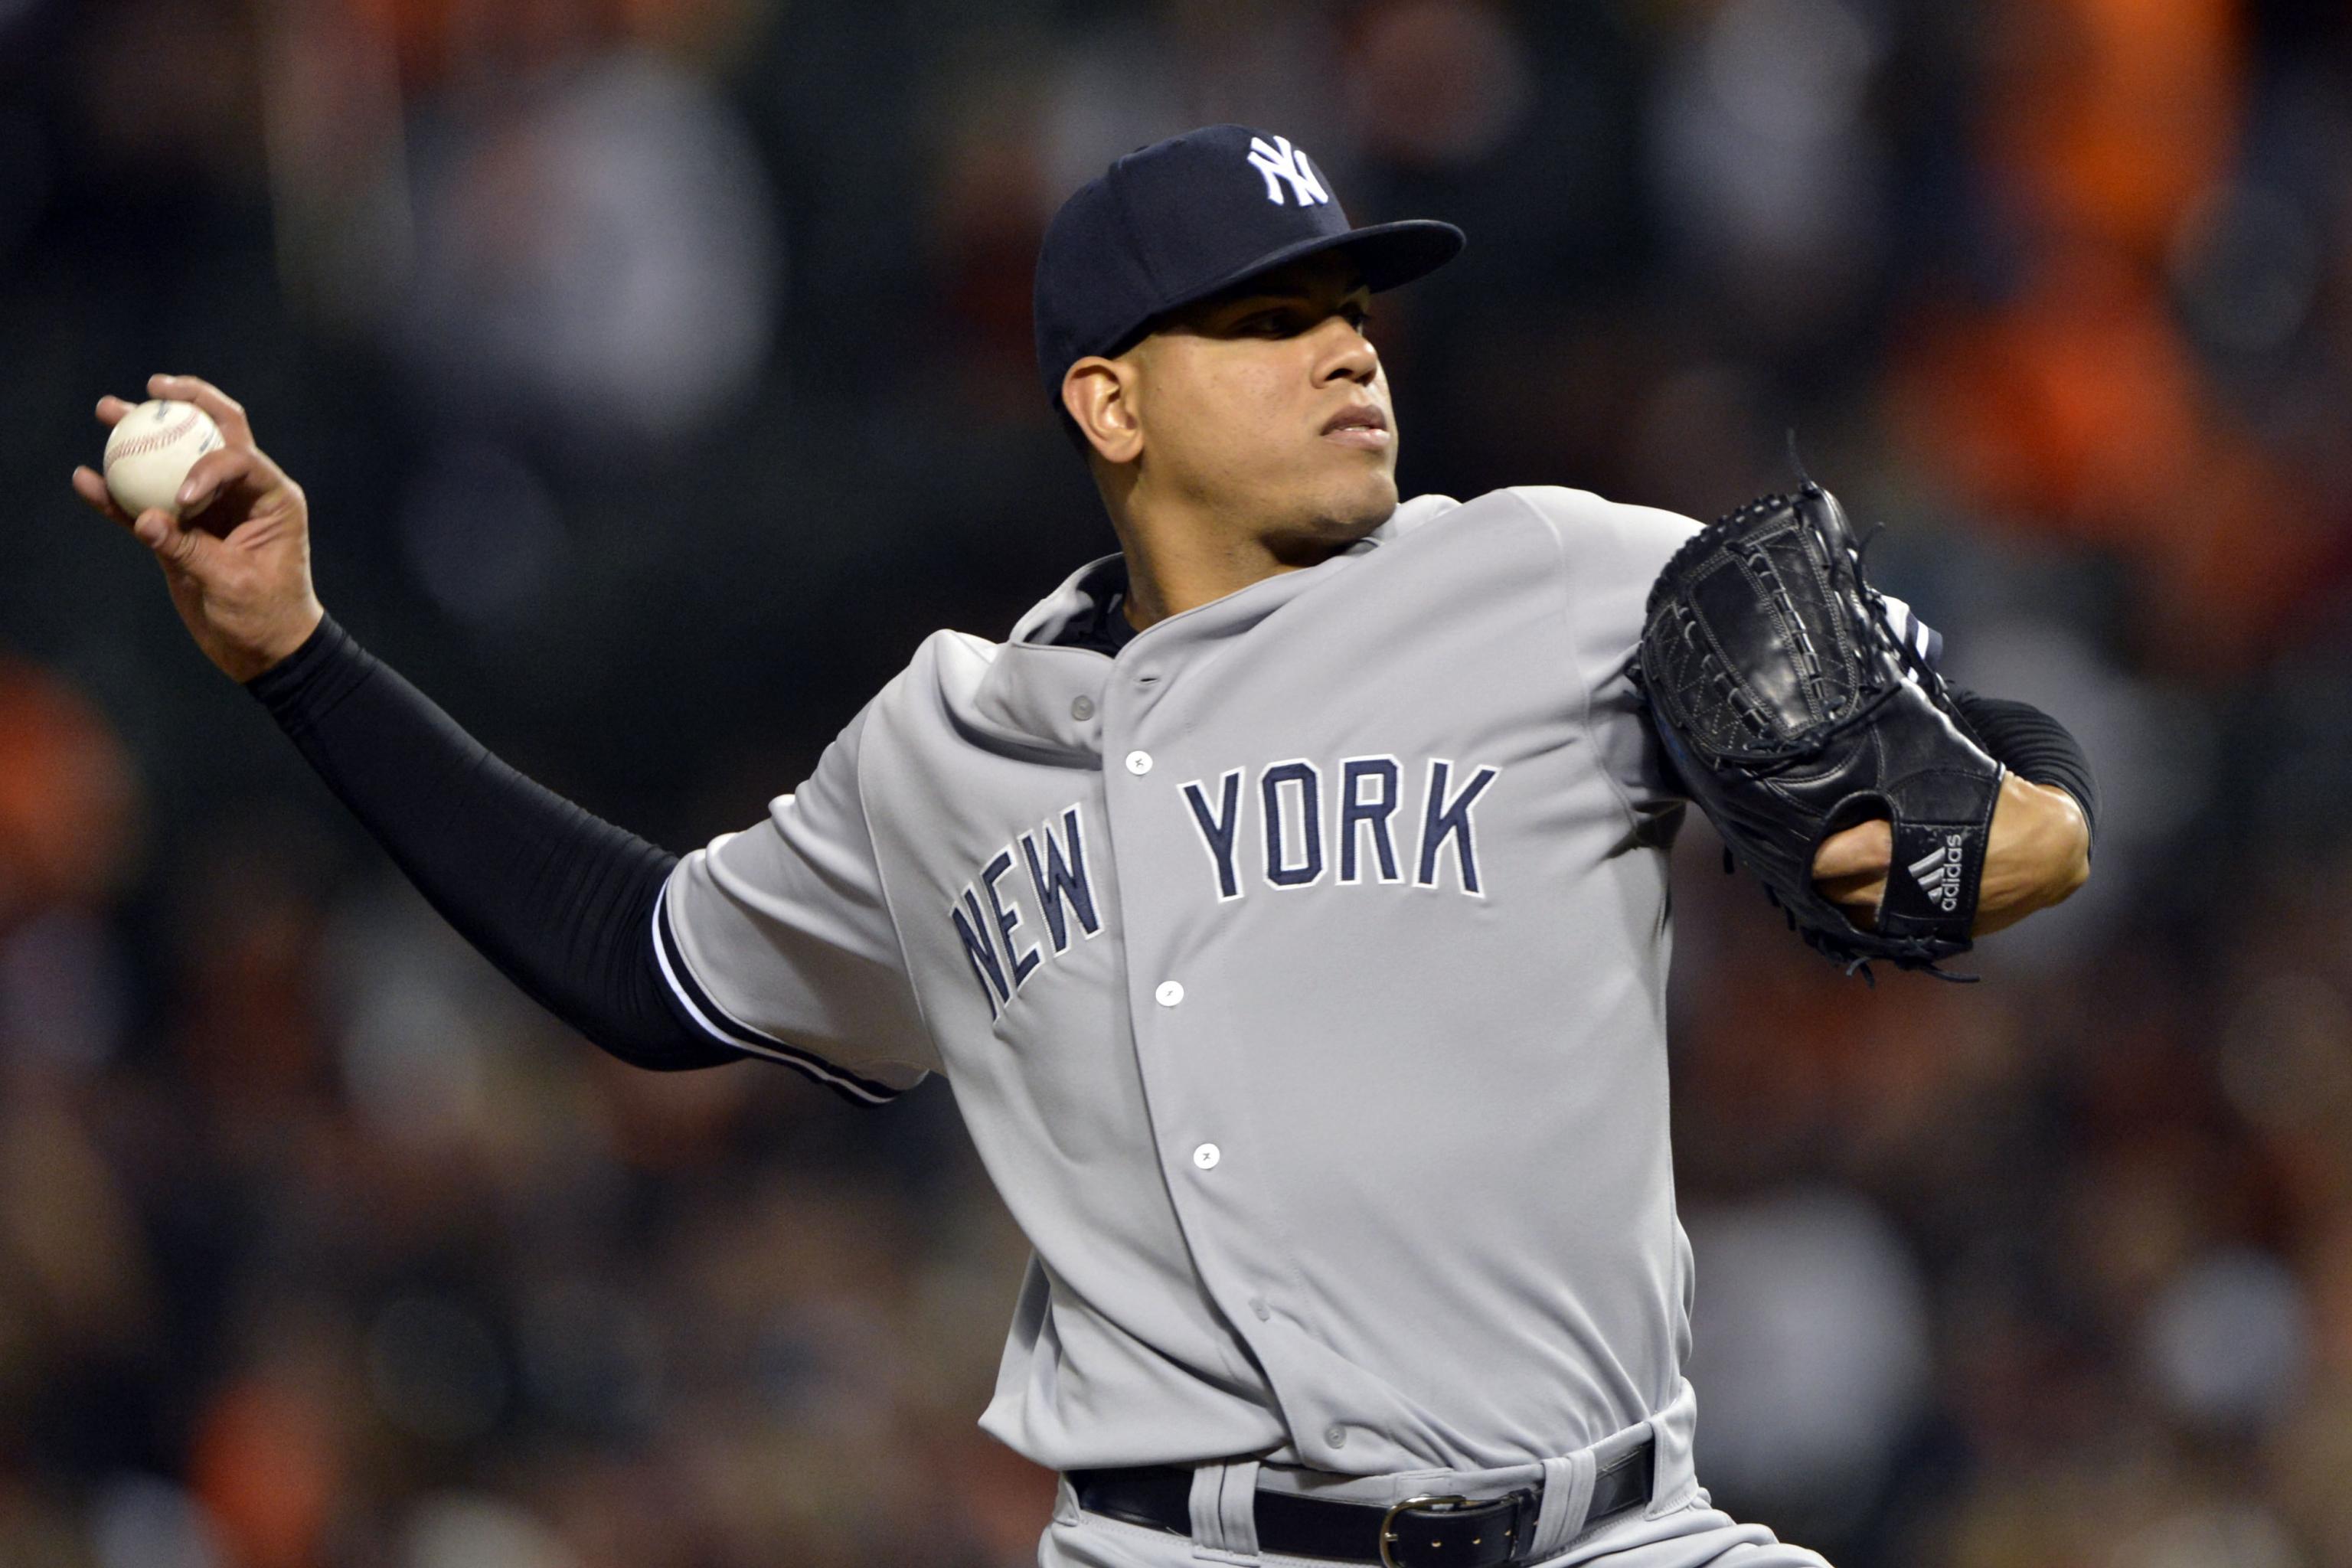 Why did Dellin Betances decline during the second half of 2015